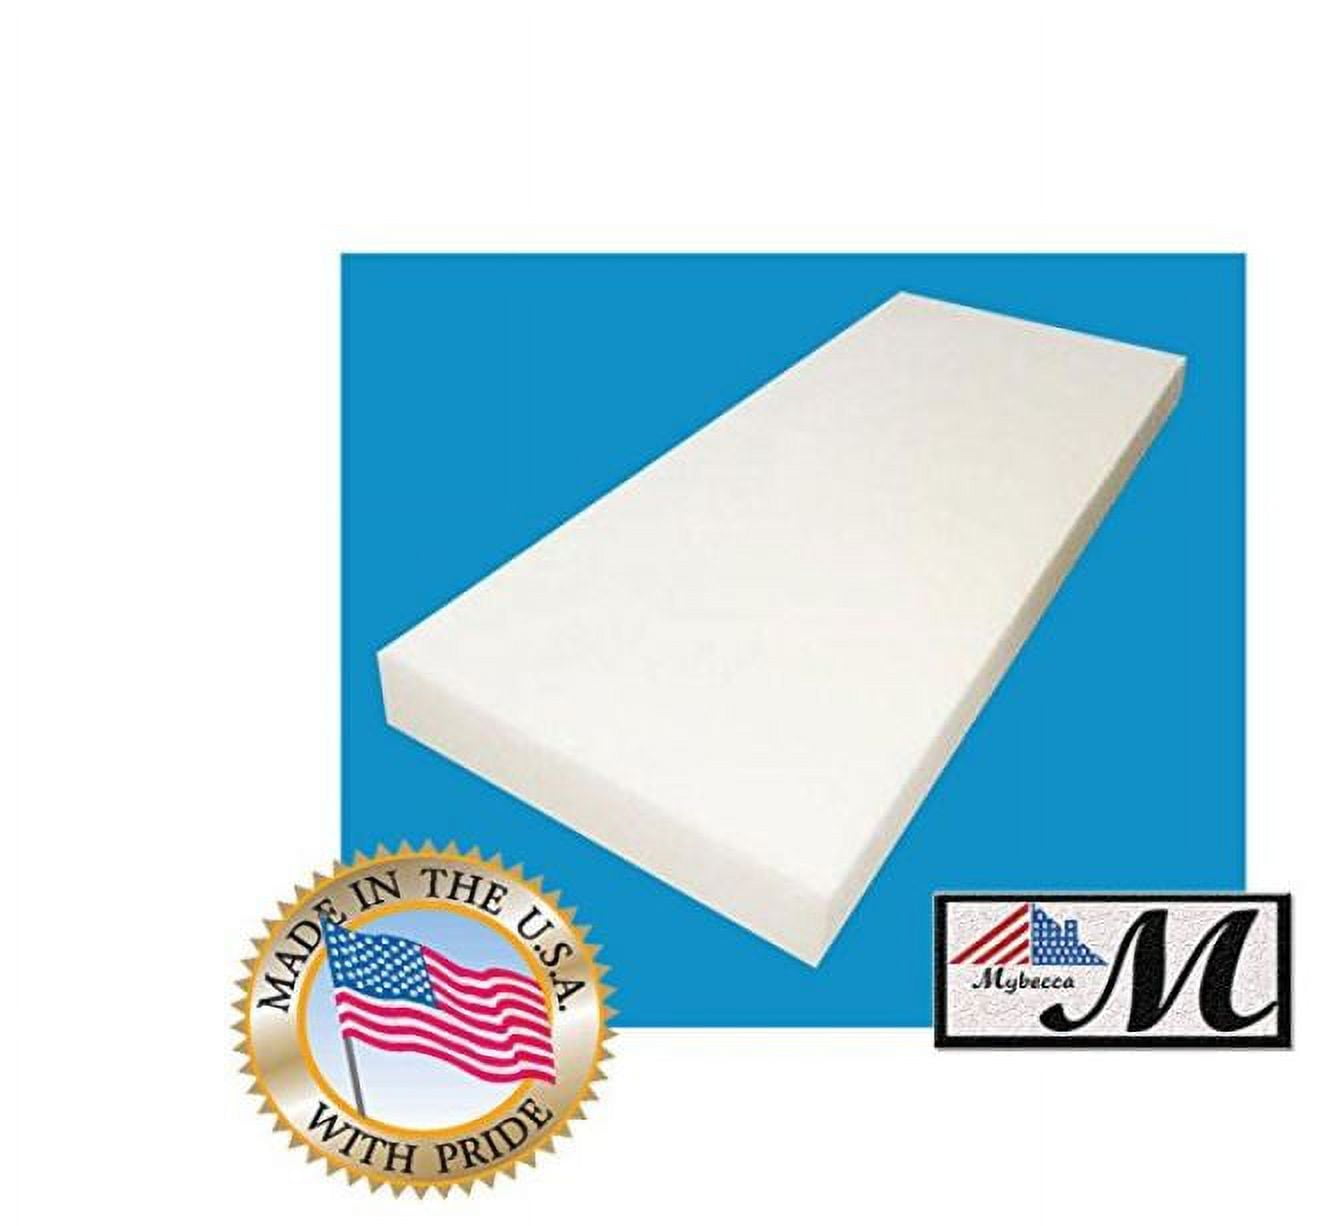 Foamma 3 x 18 x 72 High Density Upholstery Foam Padding, Thick-Custom  Pillow, Chair, and Couch Cushion Replacement Foam, Craft Foam Upholstery